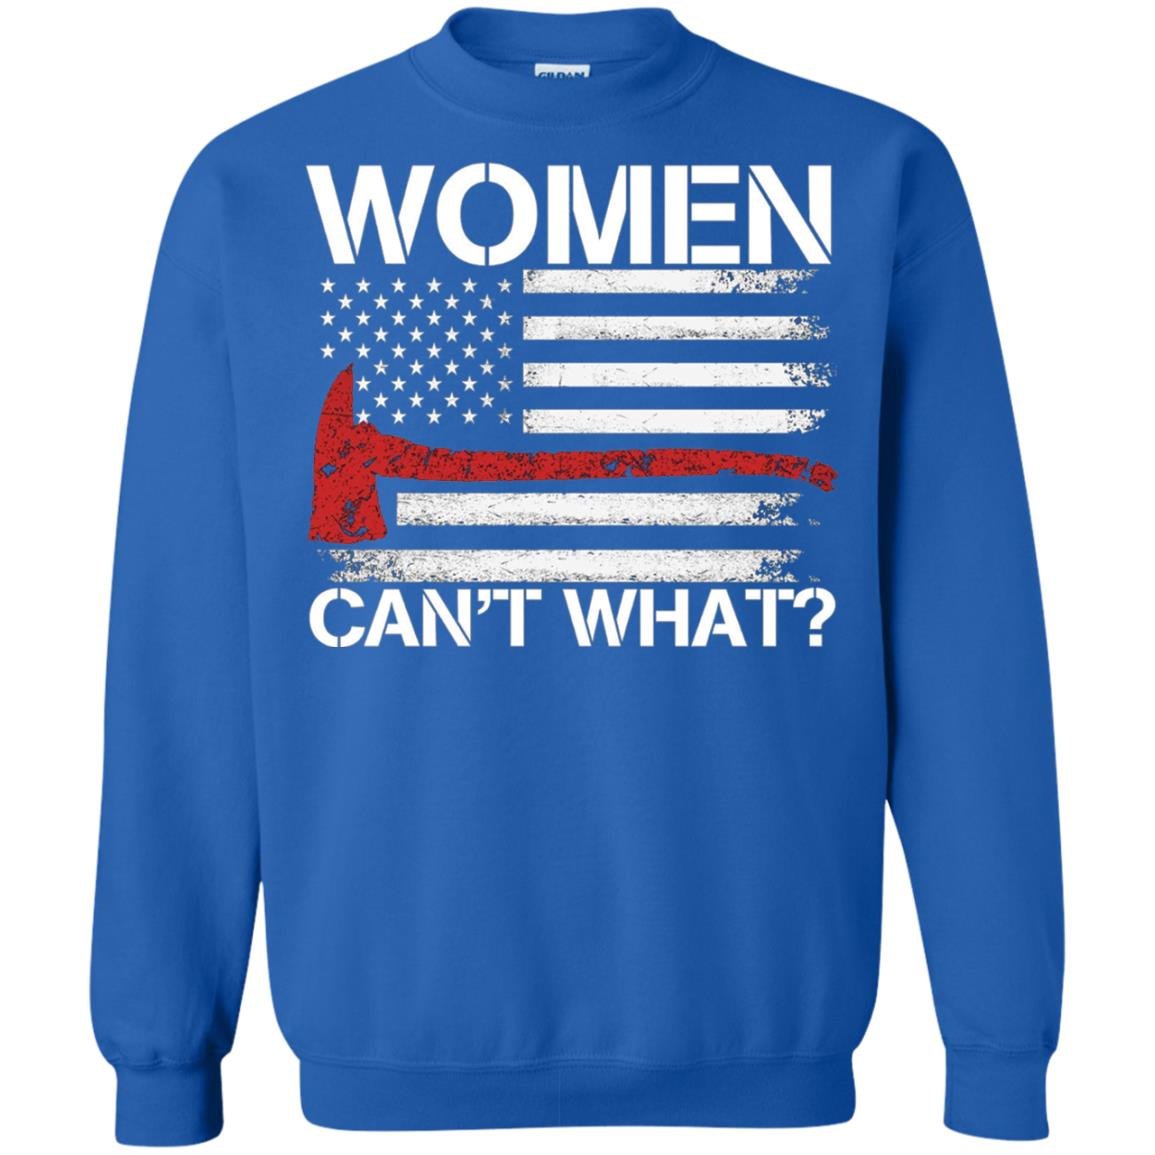 Inktee Store - Women Cant What Firefighter Sweatshirt Image